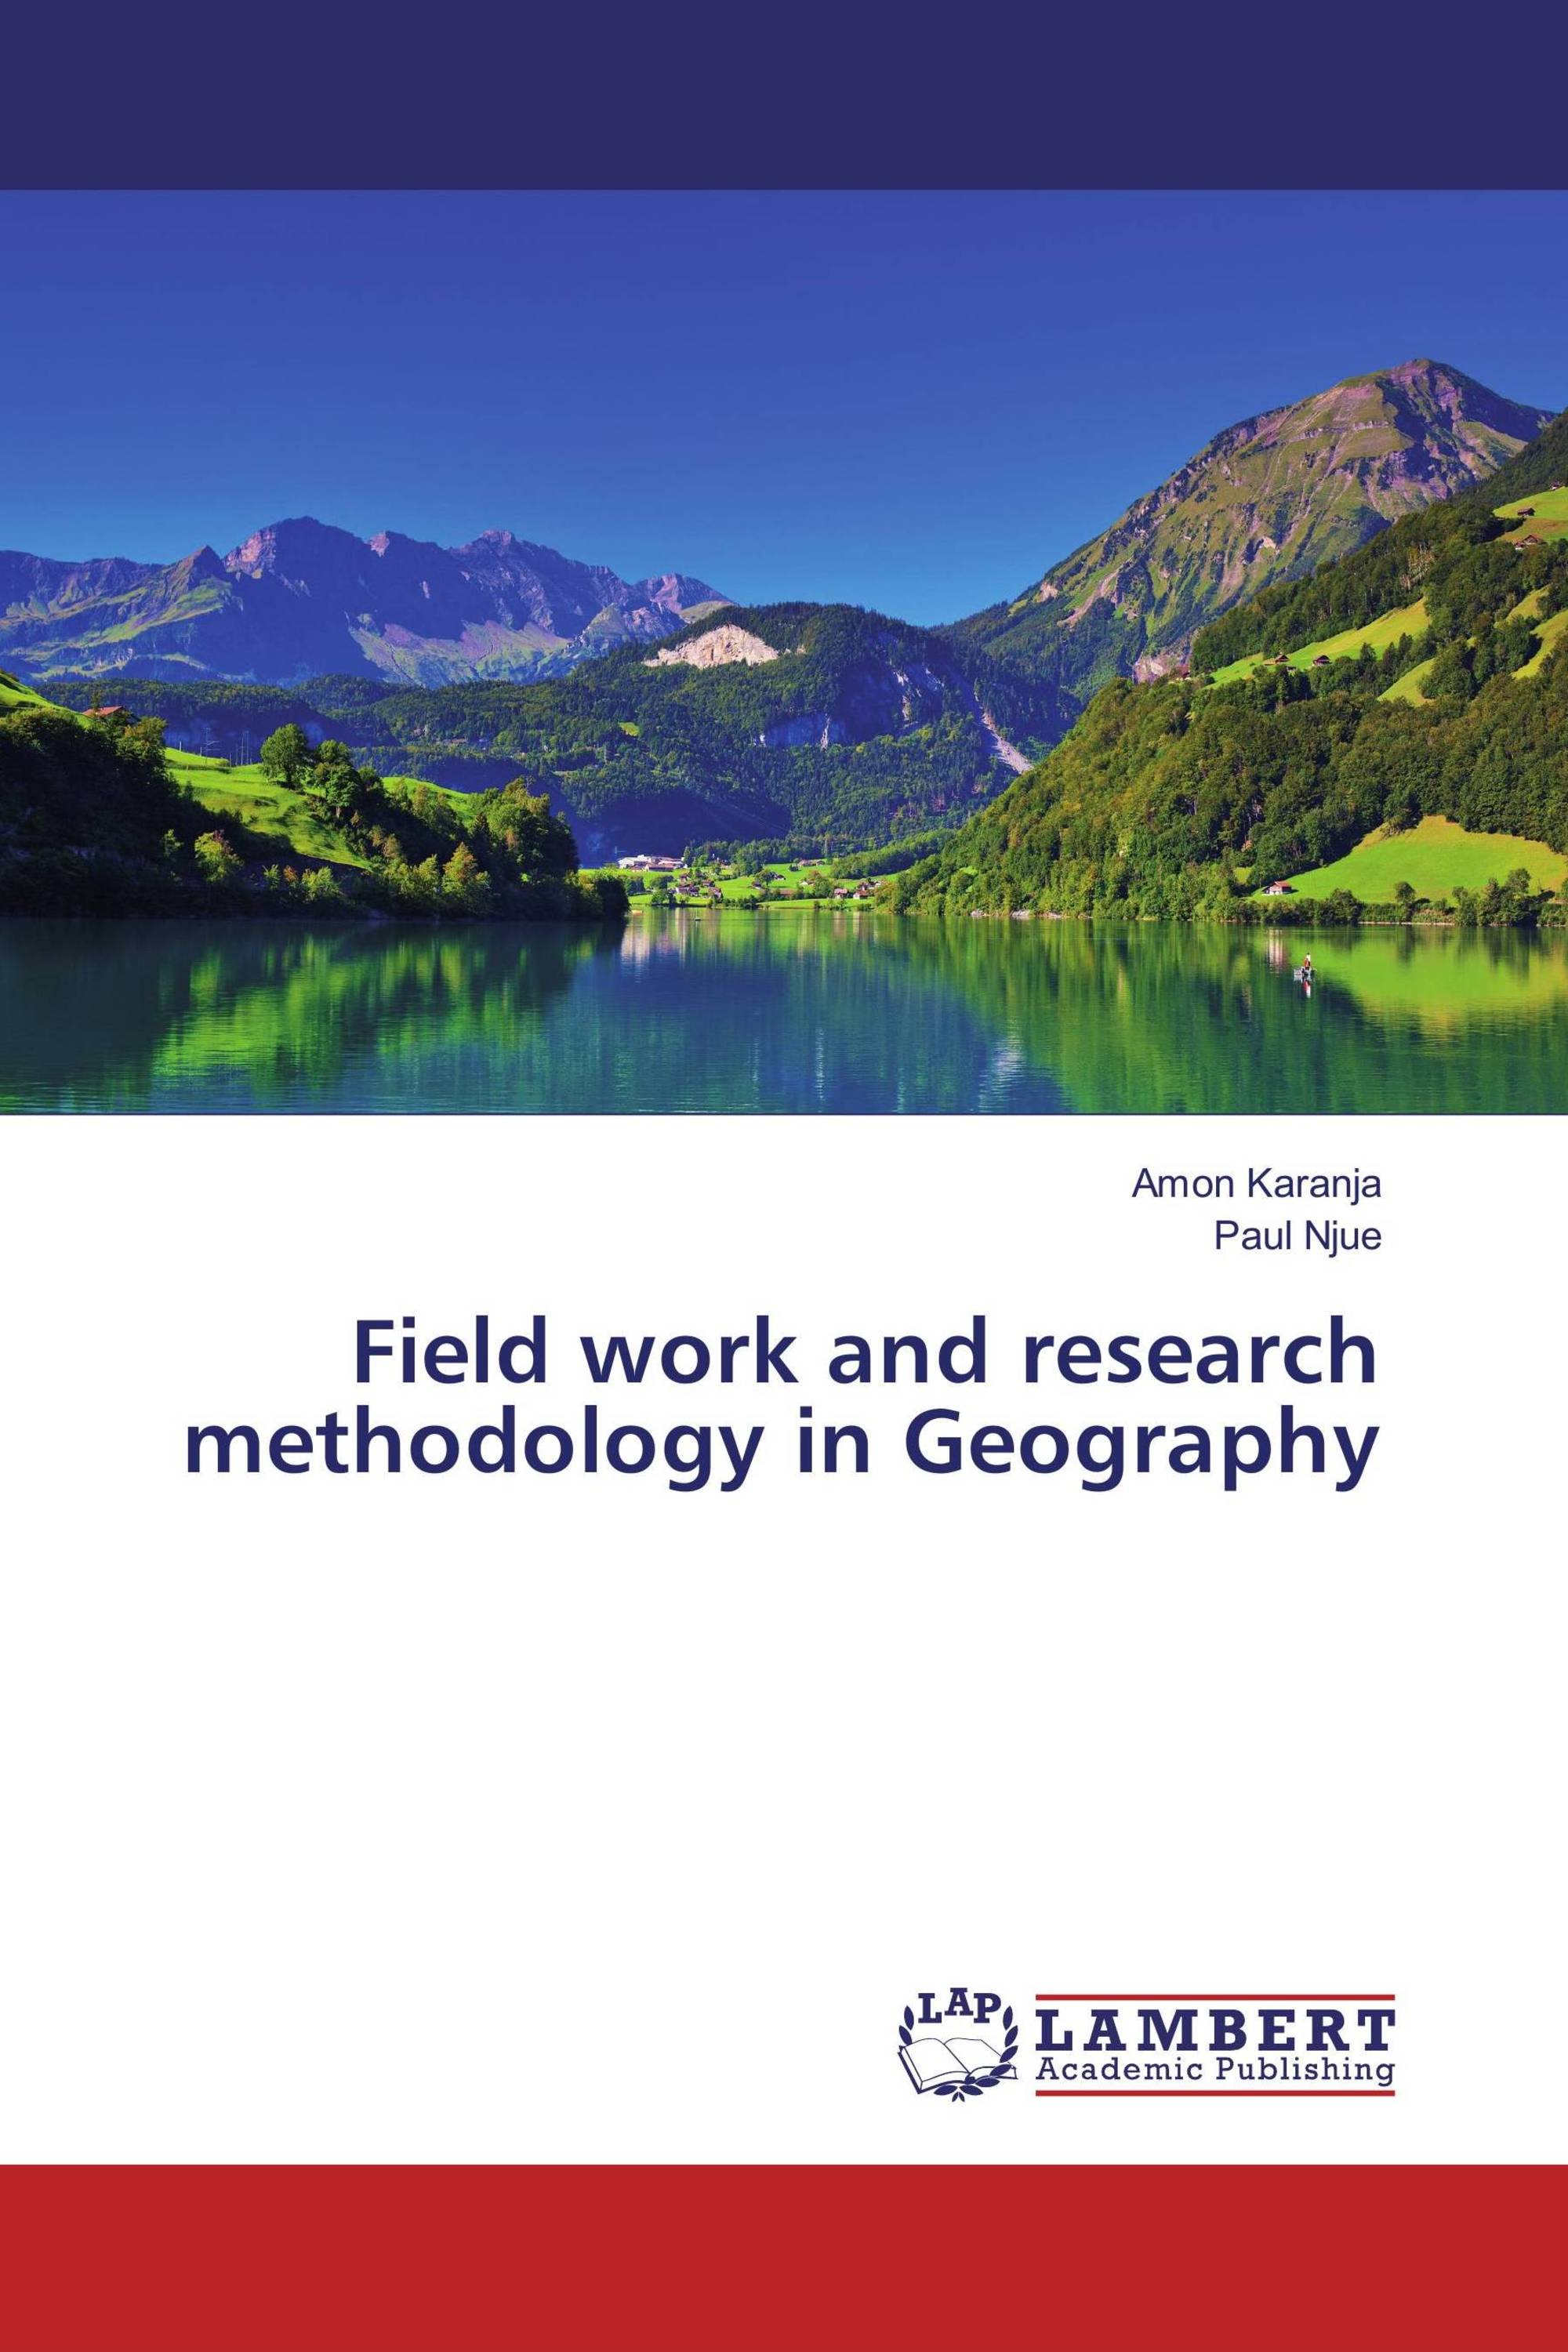 how to write a methodology for geography